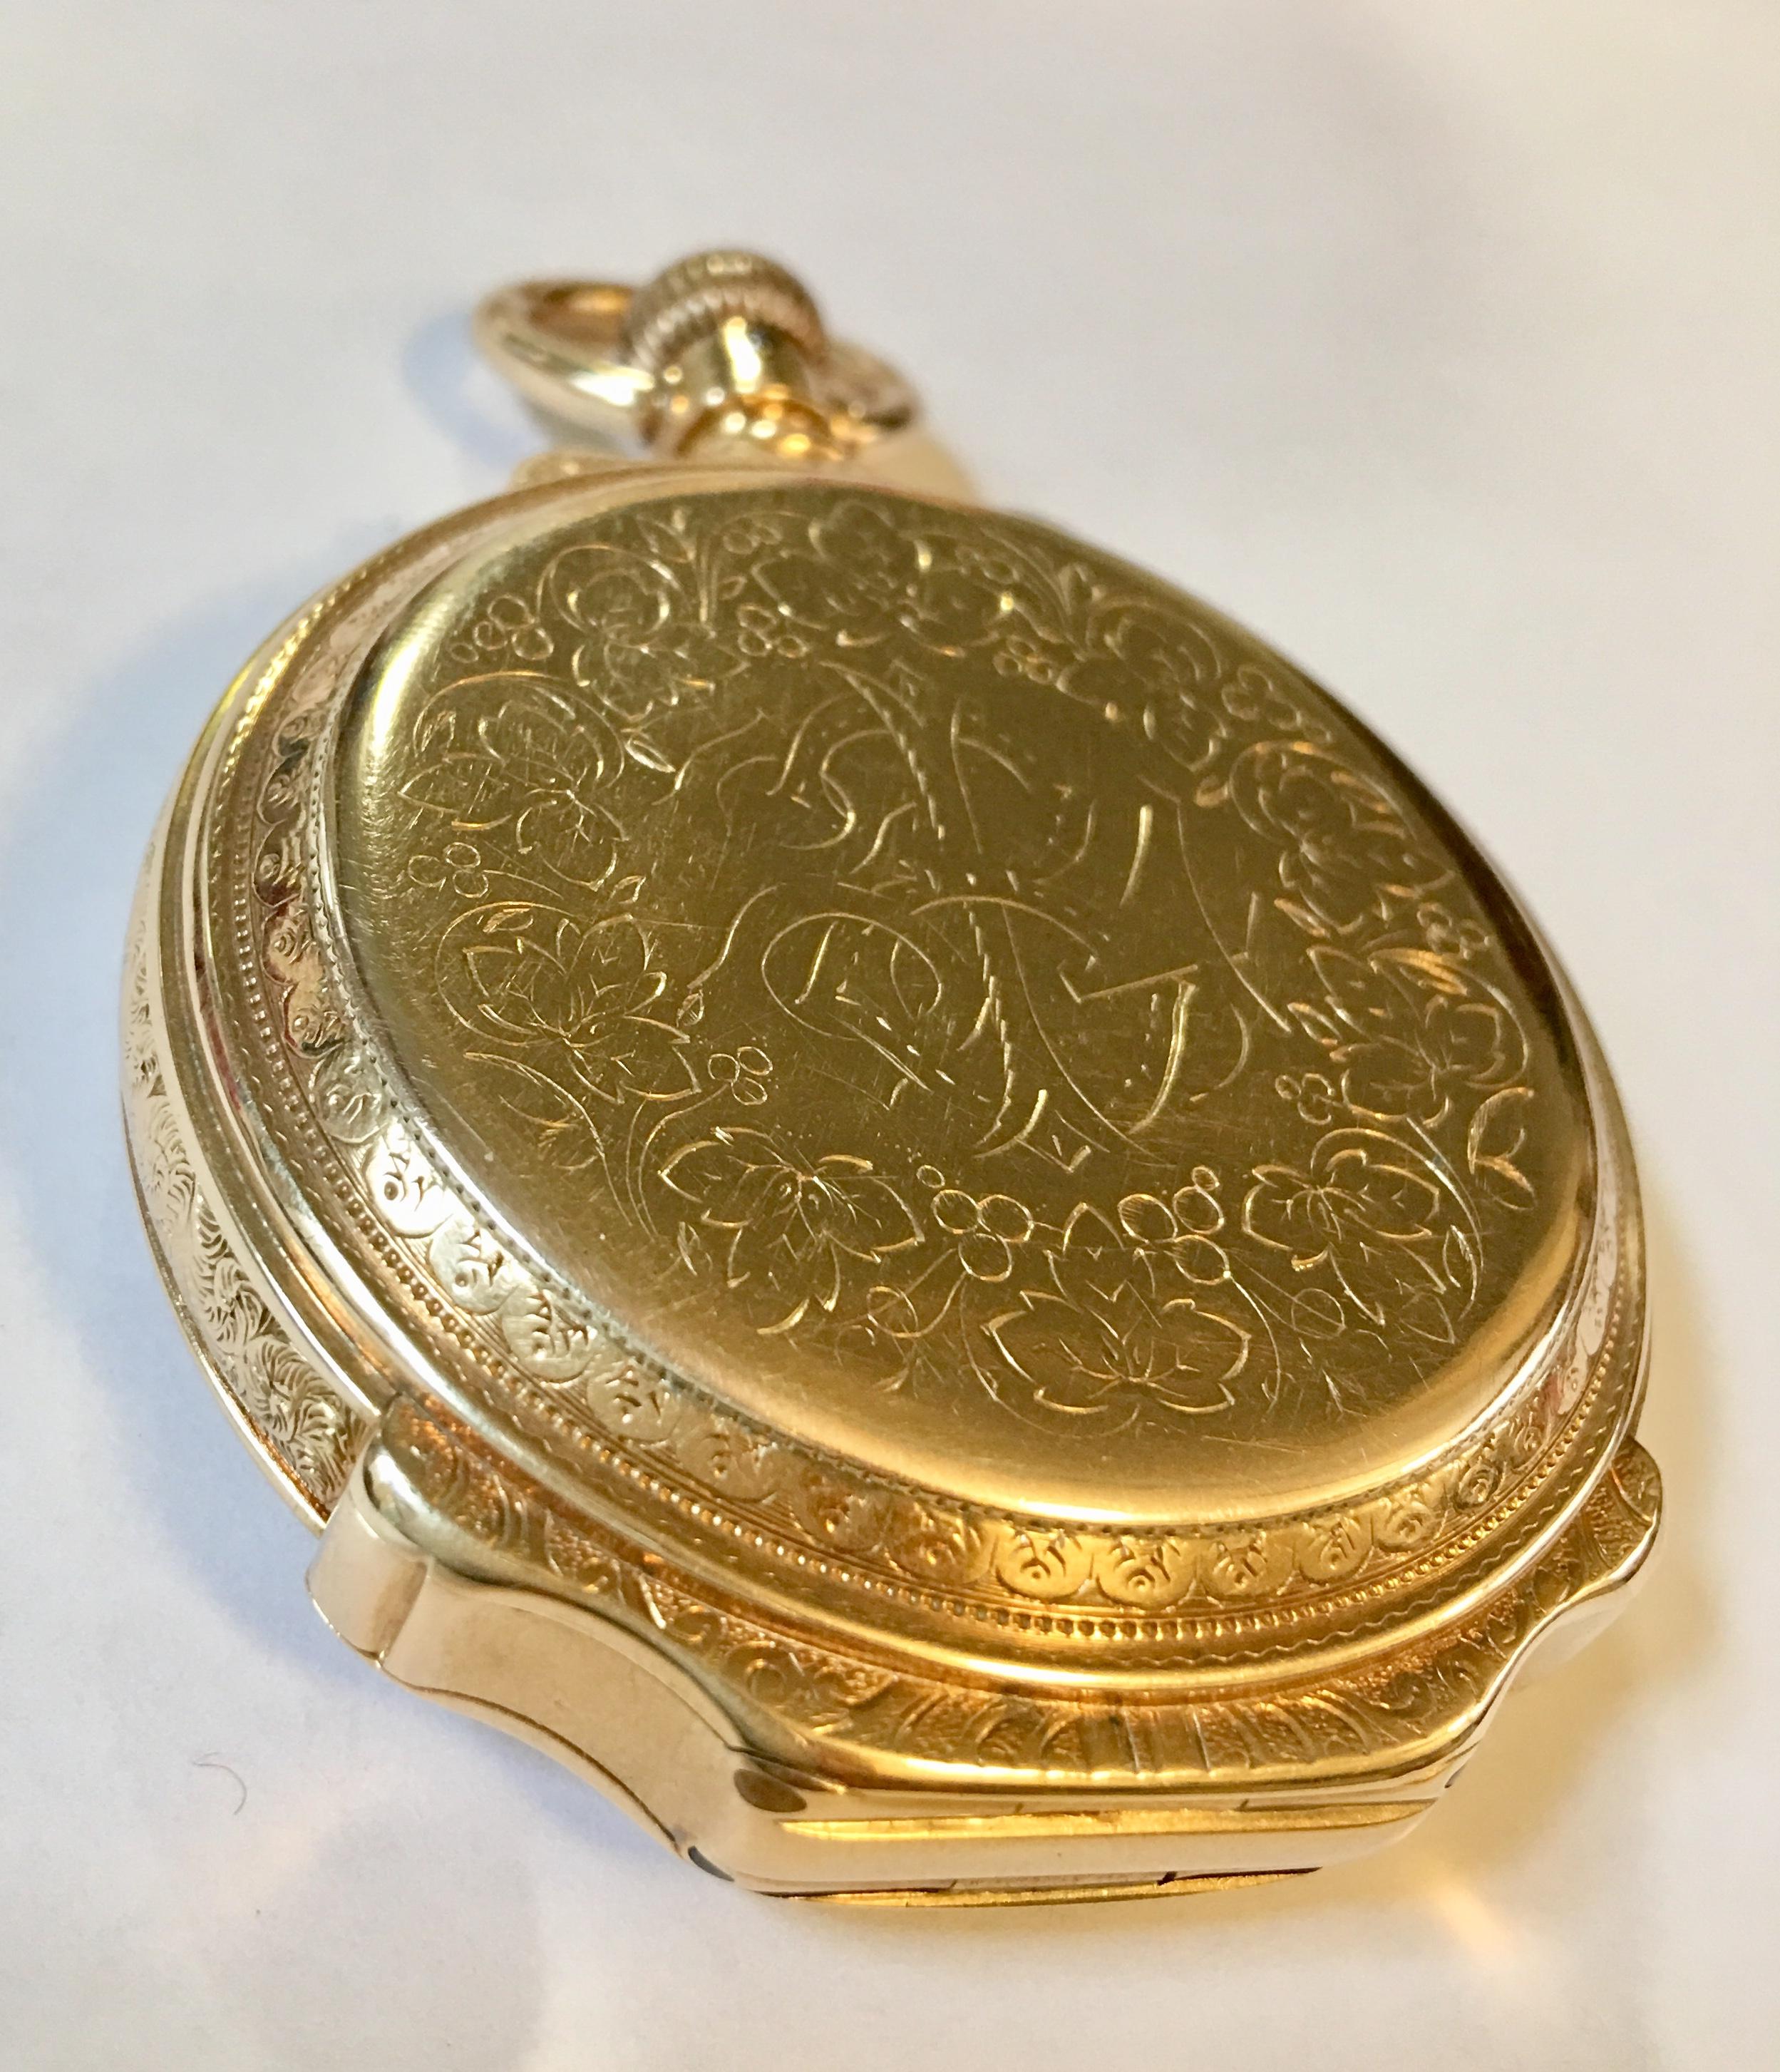 A 14-karat gold solid full hunter pocket watch. The watch has a white enamel dial signed D.Gruen & Son with Arabic numerals and a subsidiary second hand dial. Also, has a smooth stem wind, a hinged back cover to protect its works and front cover